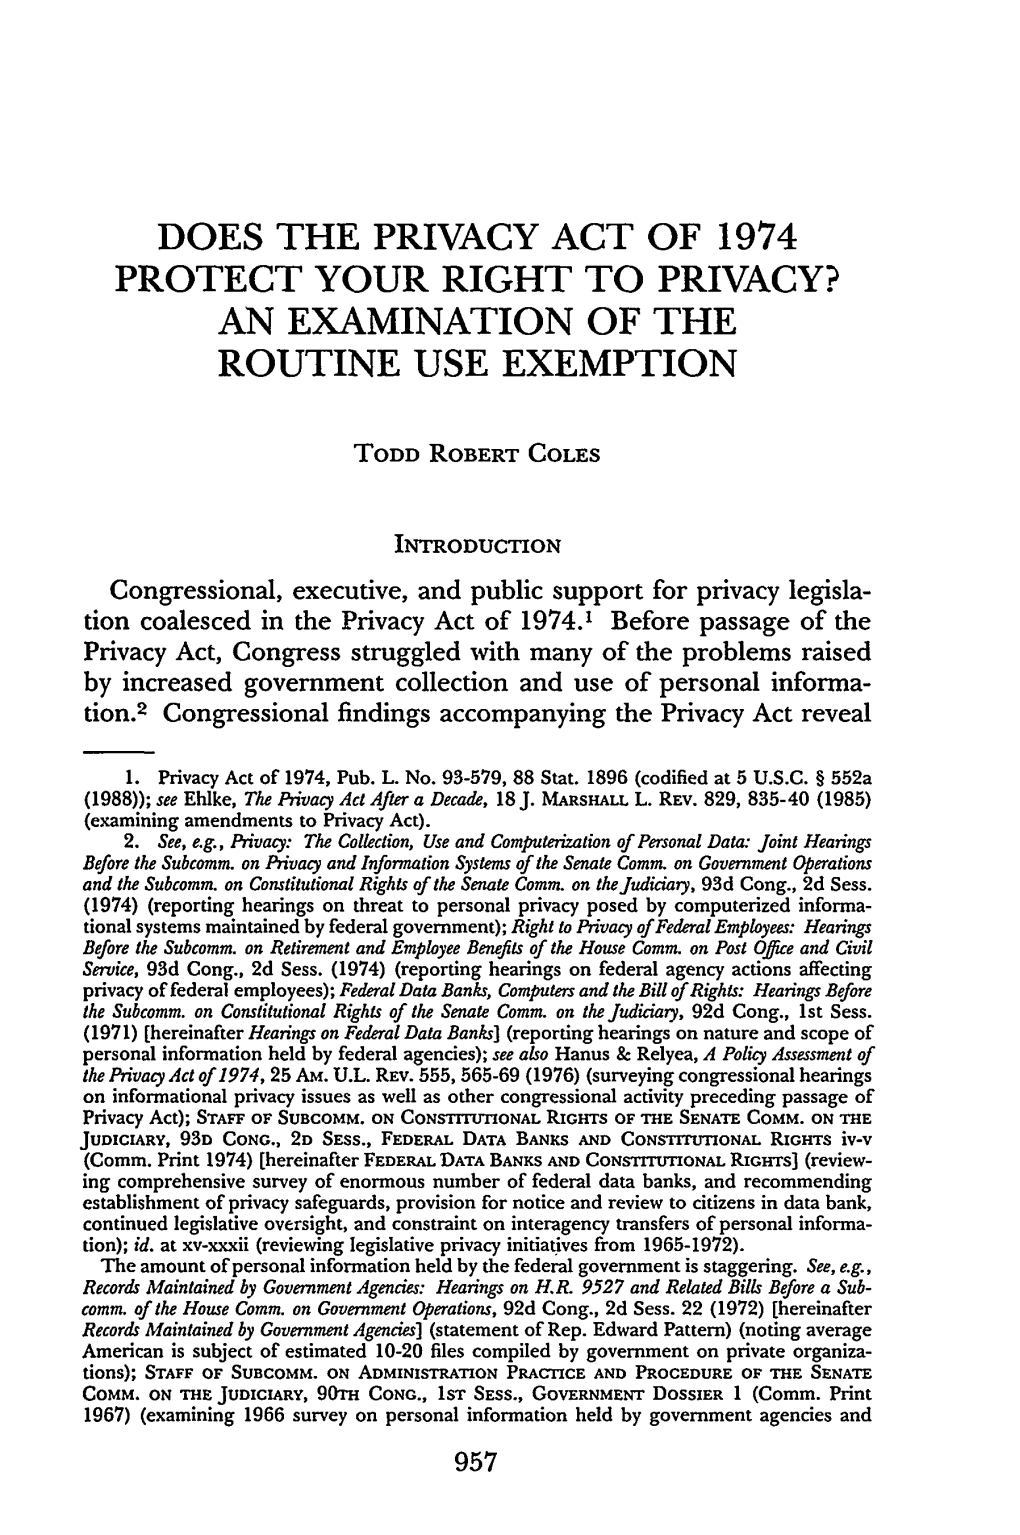 Does the Privacy Act of 1974 Protect Your Right to Privacy? an Examination of the Routine Use Exemption